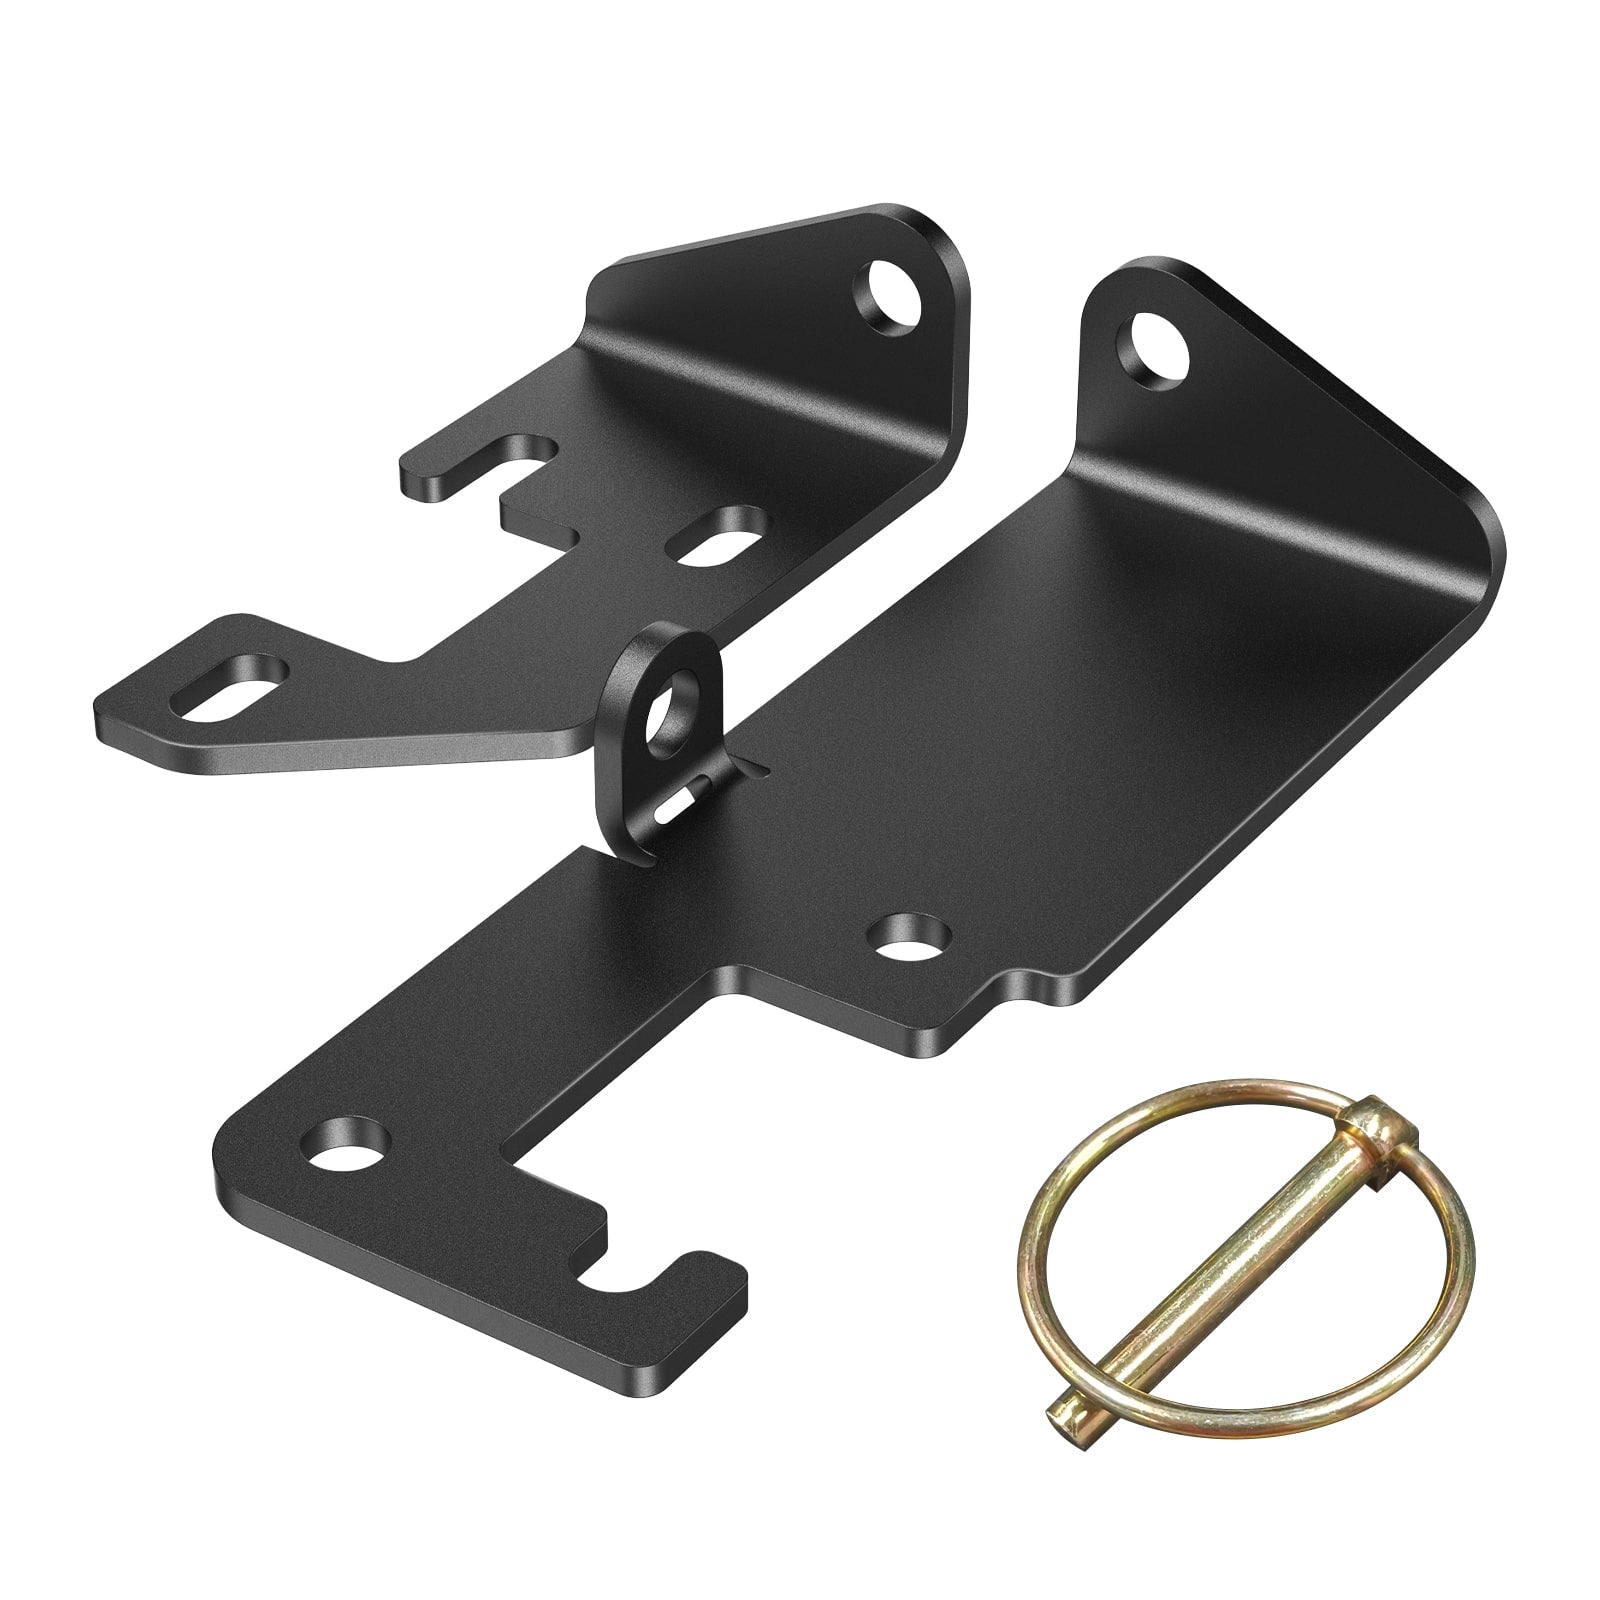 3mm Tailgate Rear Door Lock for Ducato Jumper Boxer X250 H1 H2 Roof